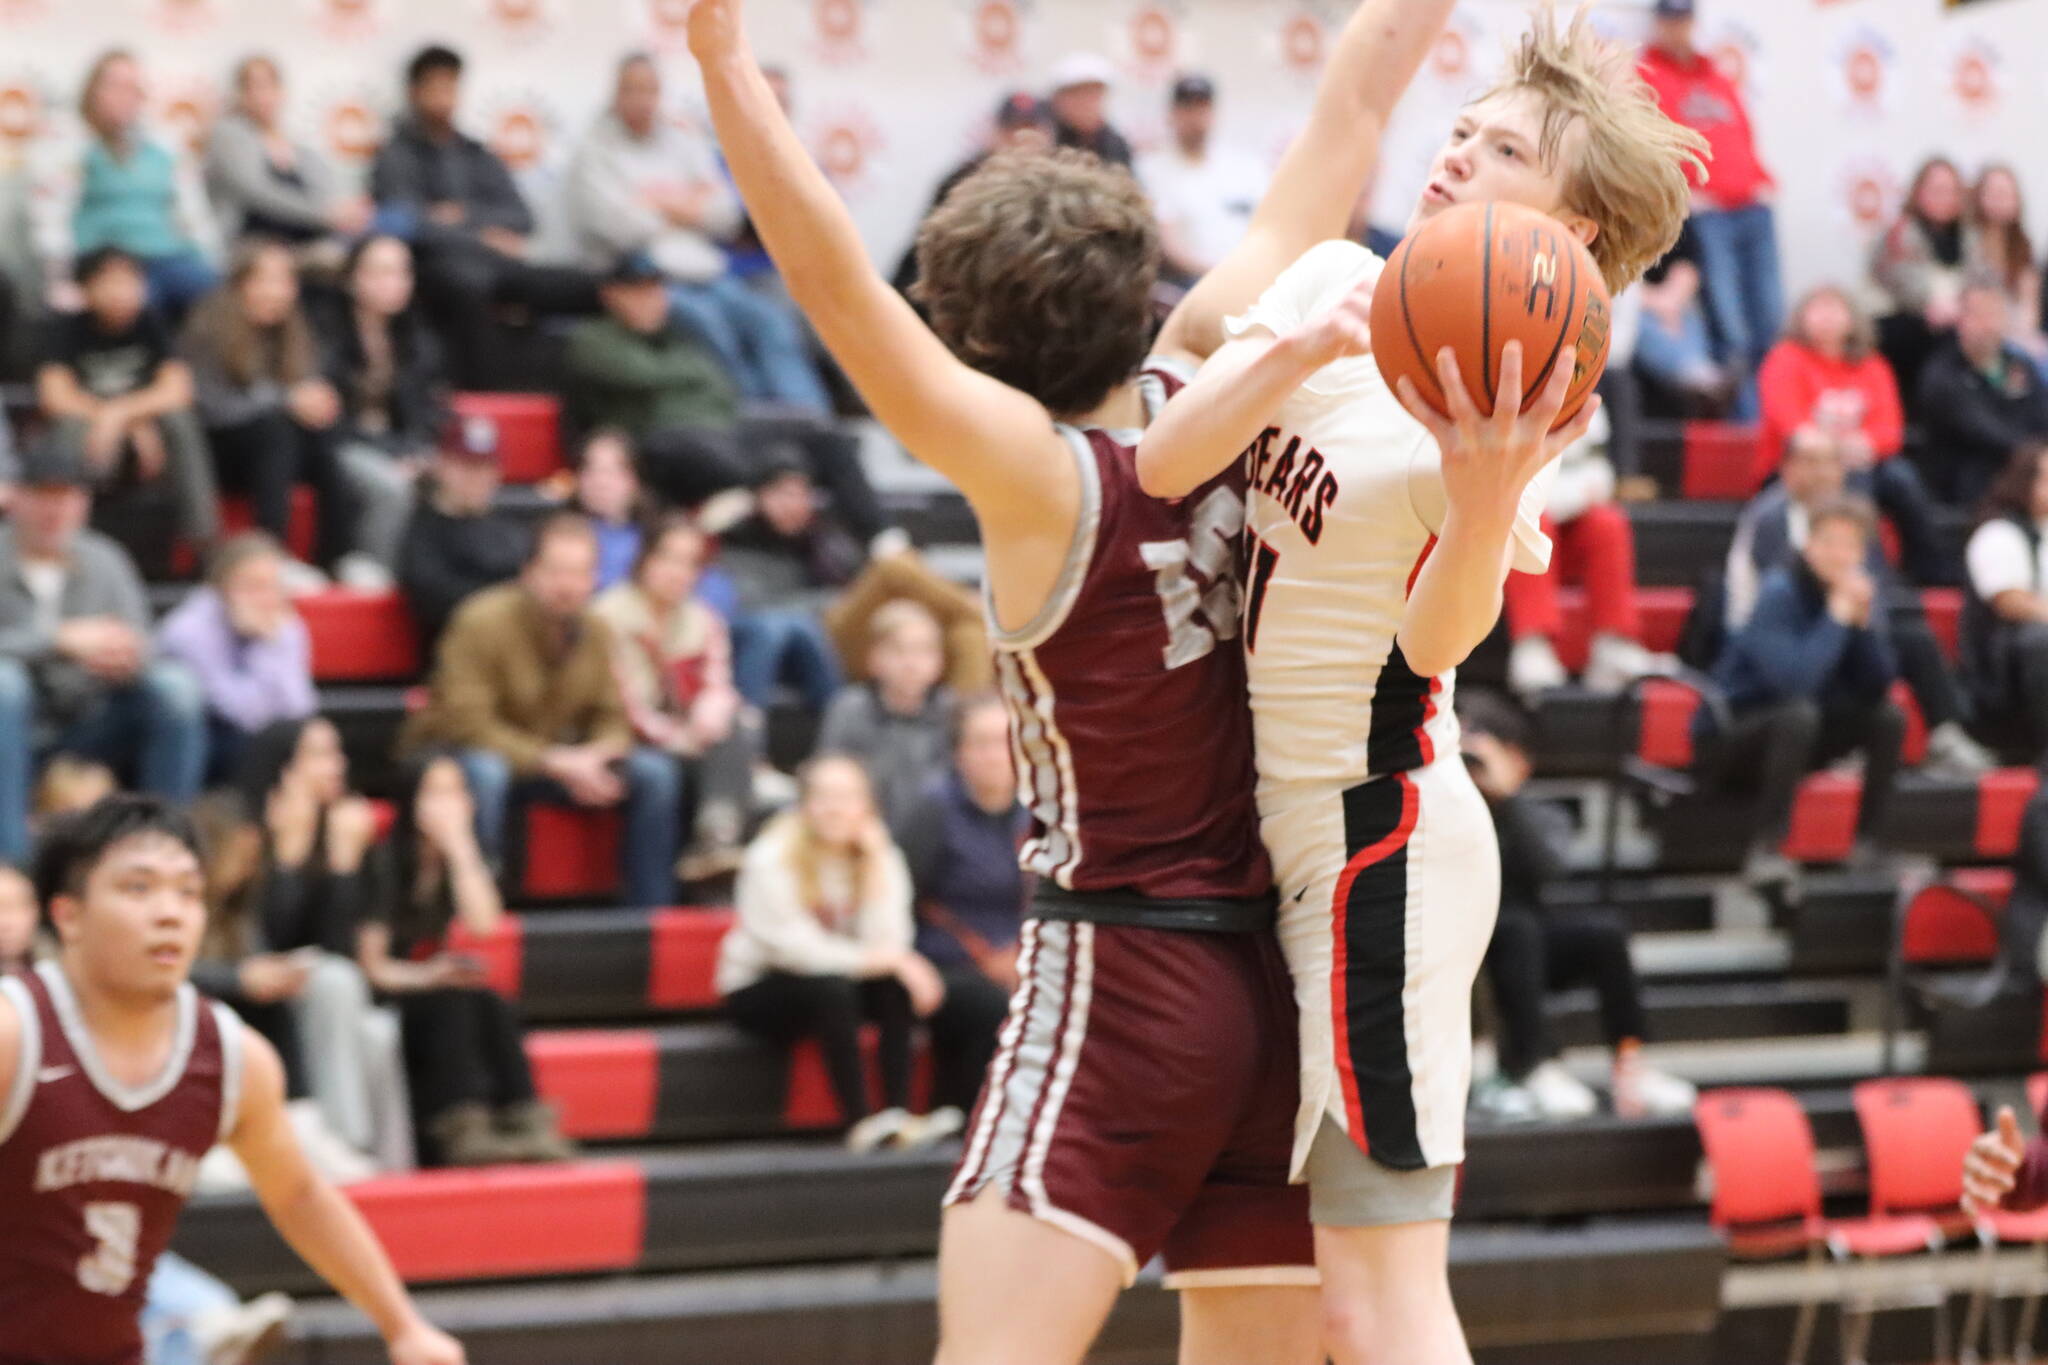 JDHS junior Sean Oliver puts up a tricky lay up against Ketchikan High School during a conference game Friday night. Oliver was second in leading his team in scores for a total of 16 points. (Jonson Kuhn / Juneau Empire)